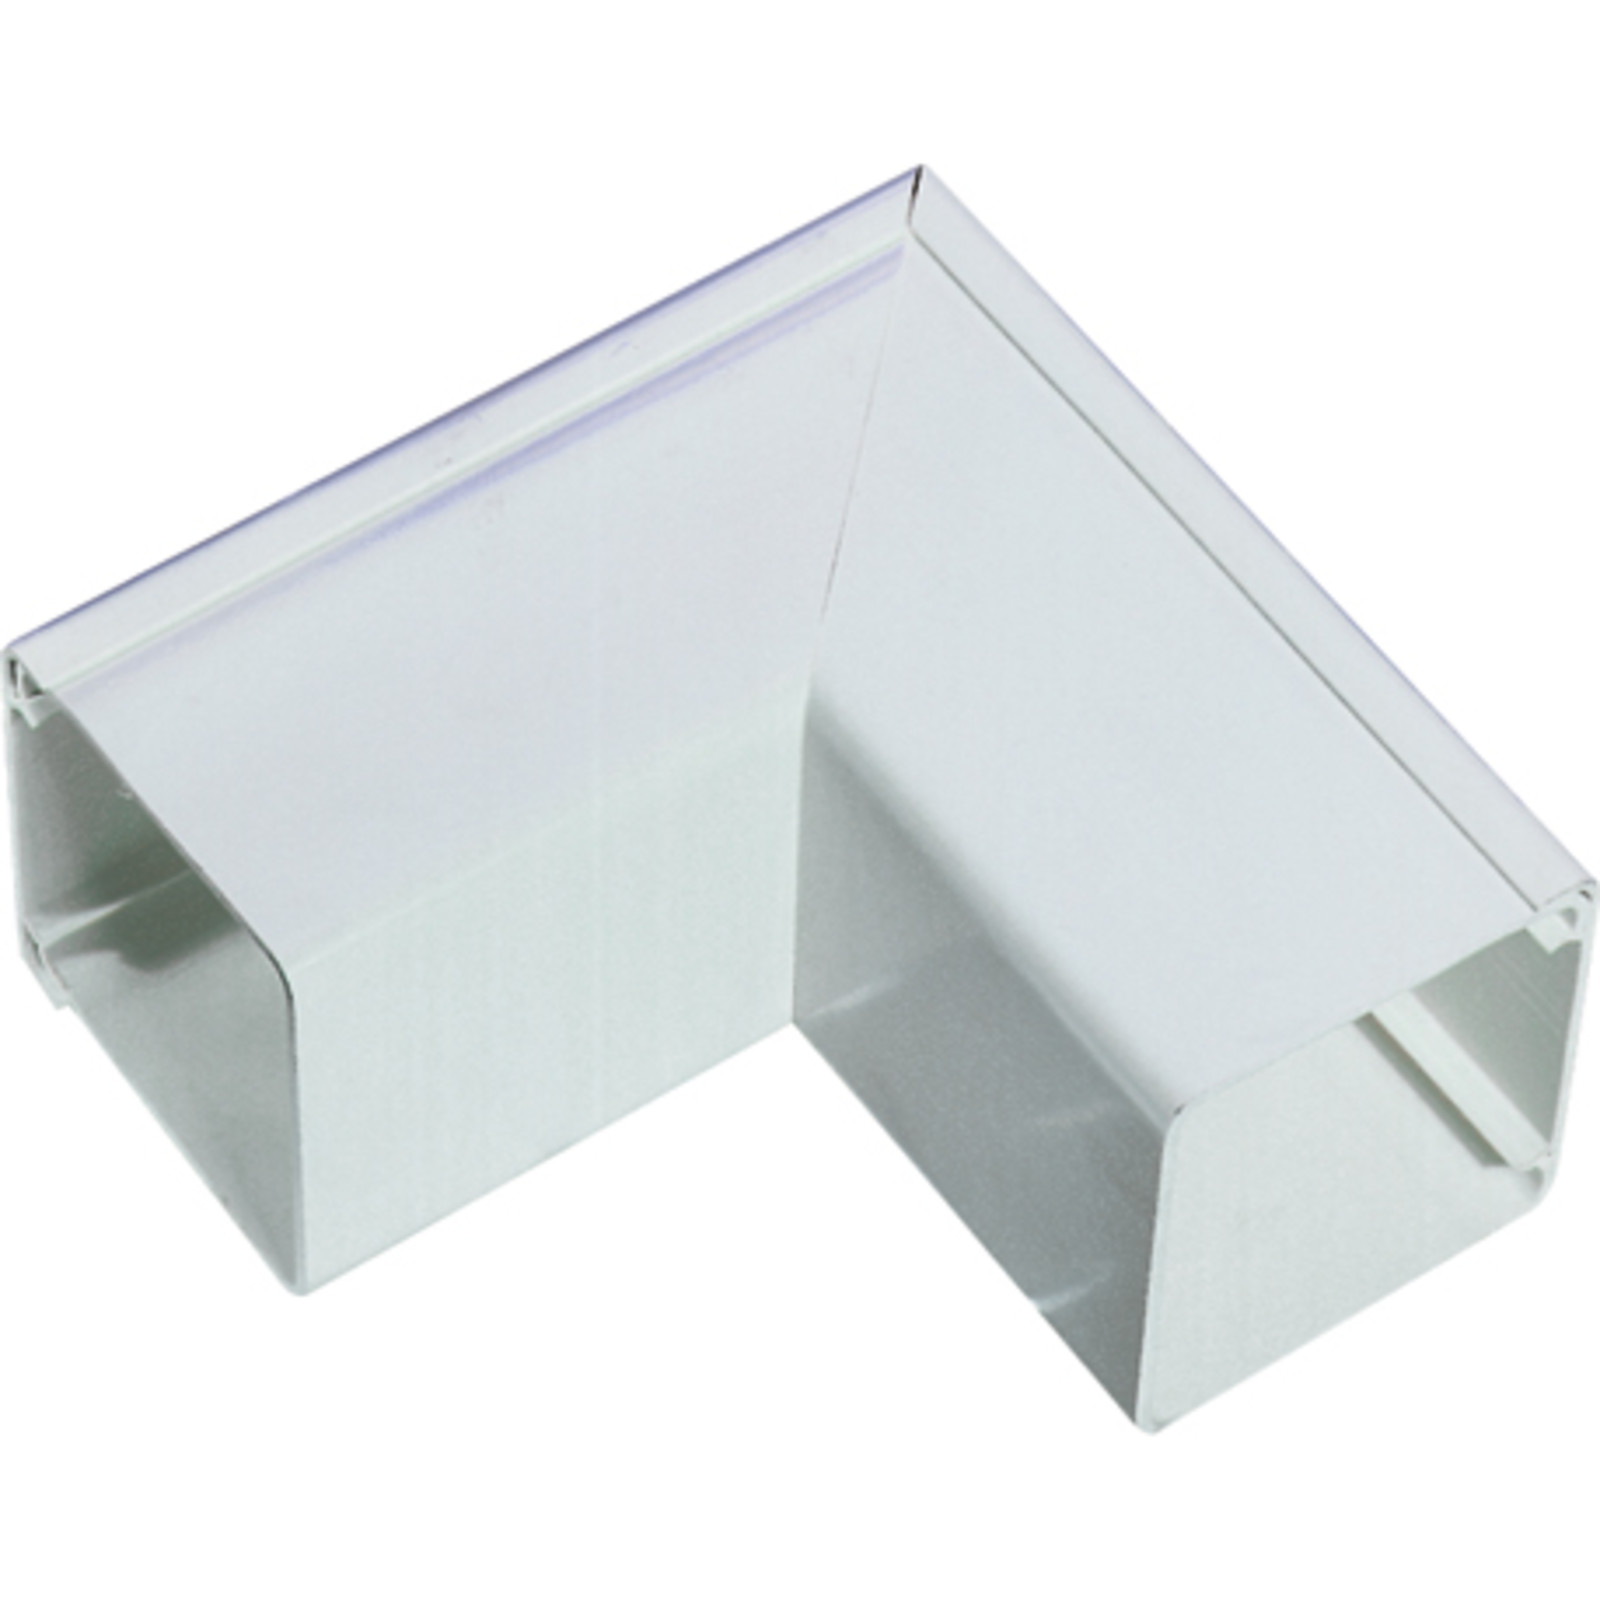 Maxi Trunking Fitting 75 x 75mm External Angle